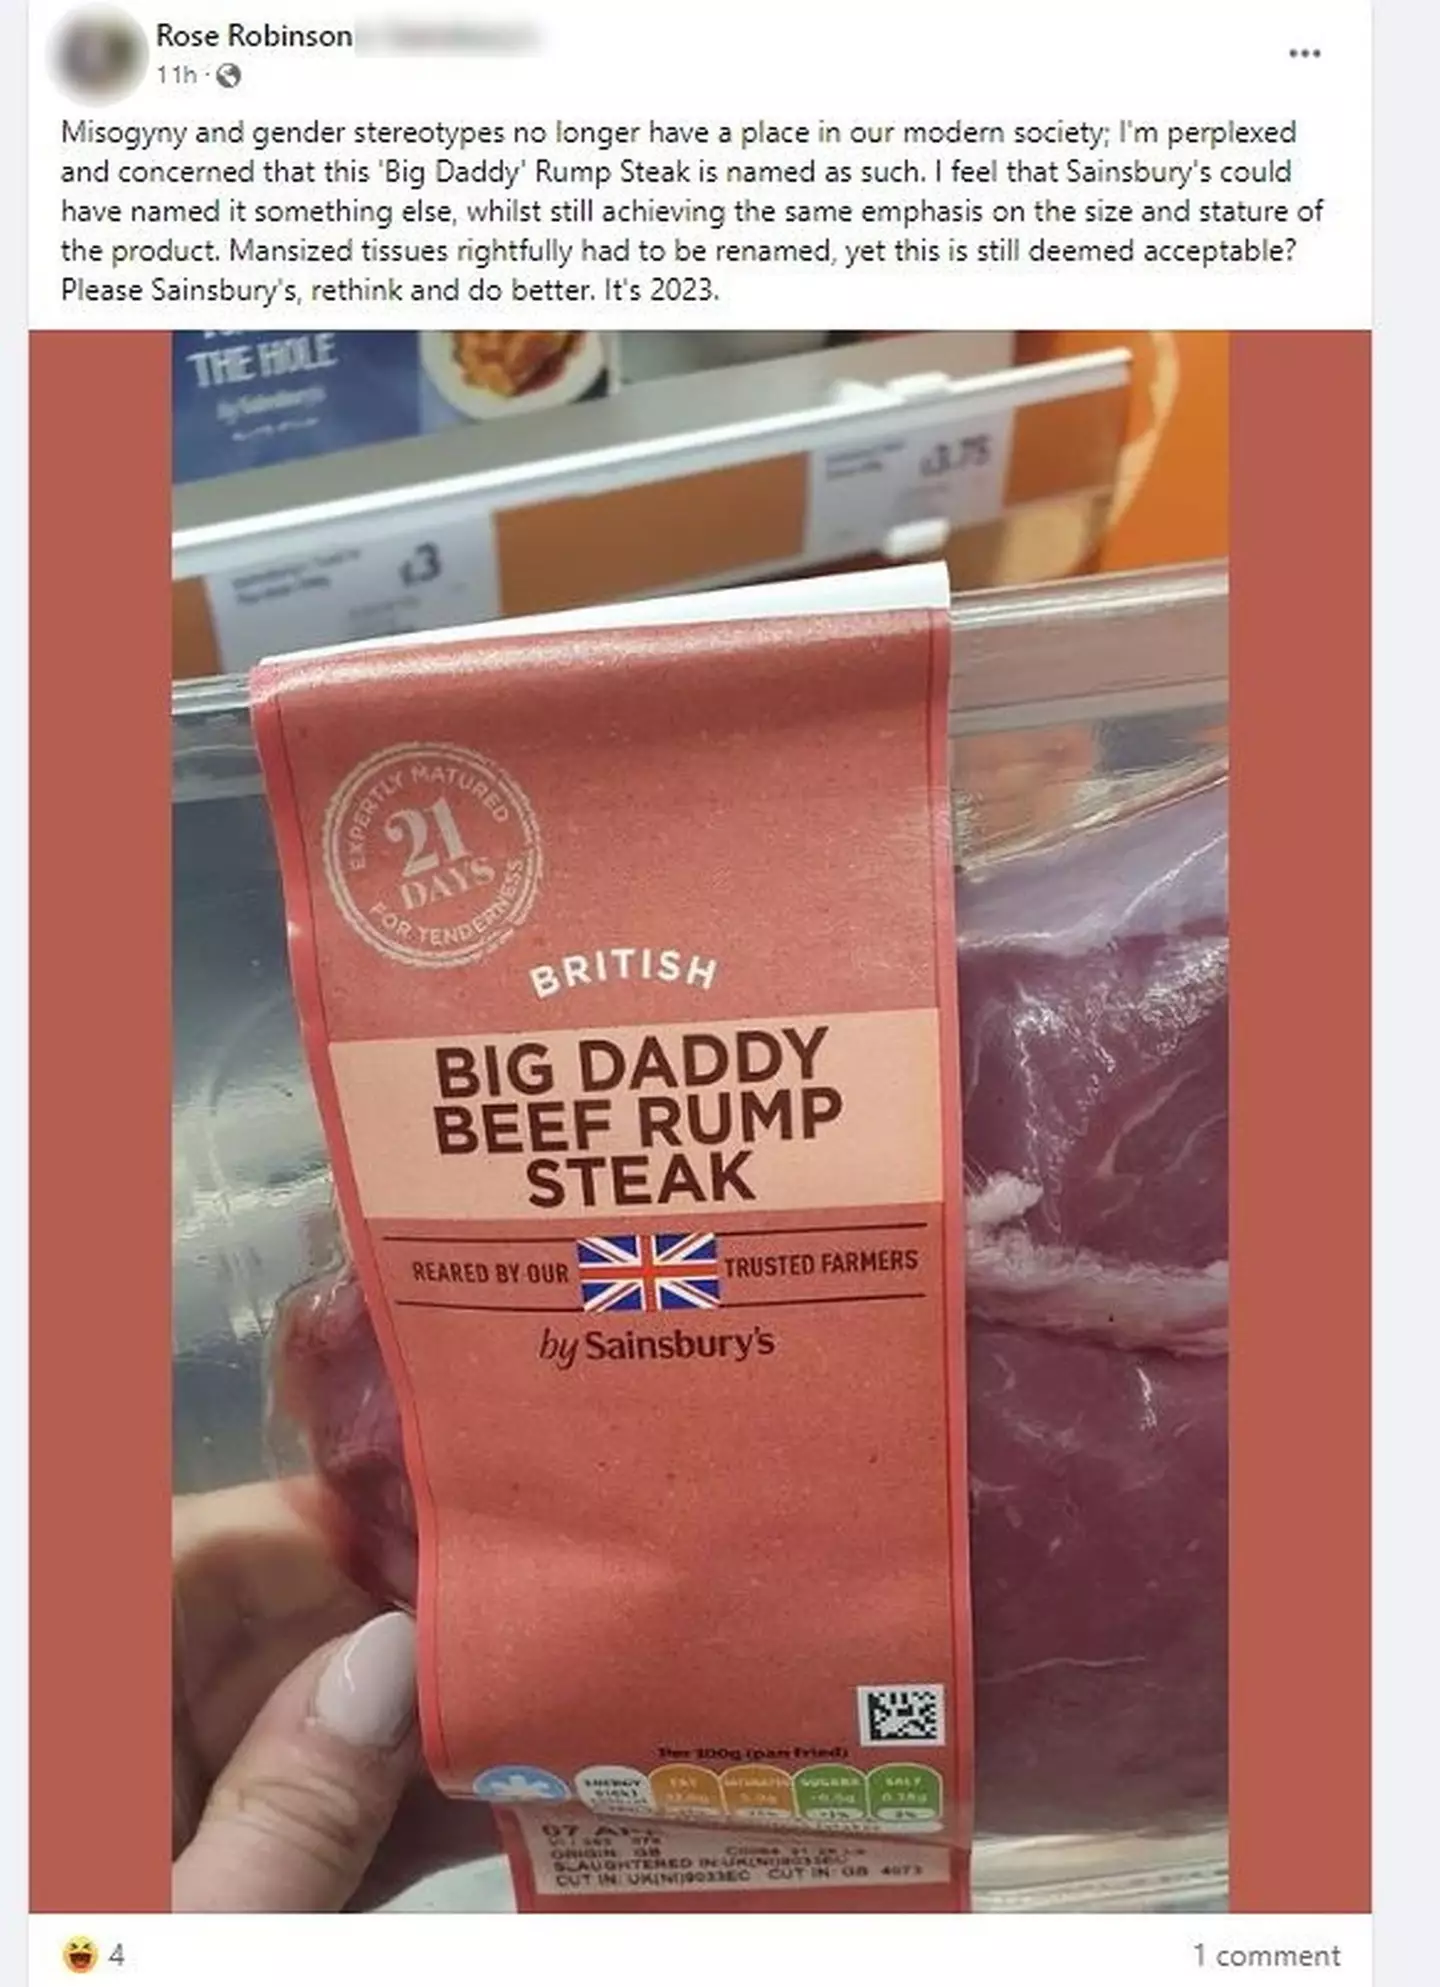 She ended up posting on Facebook about the steak.